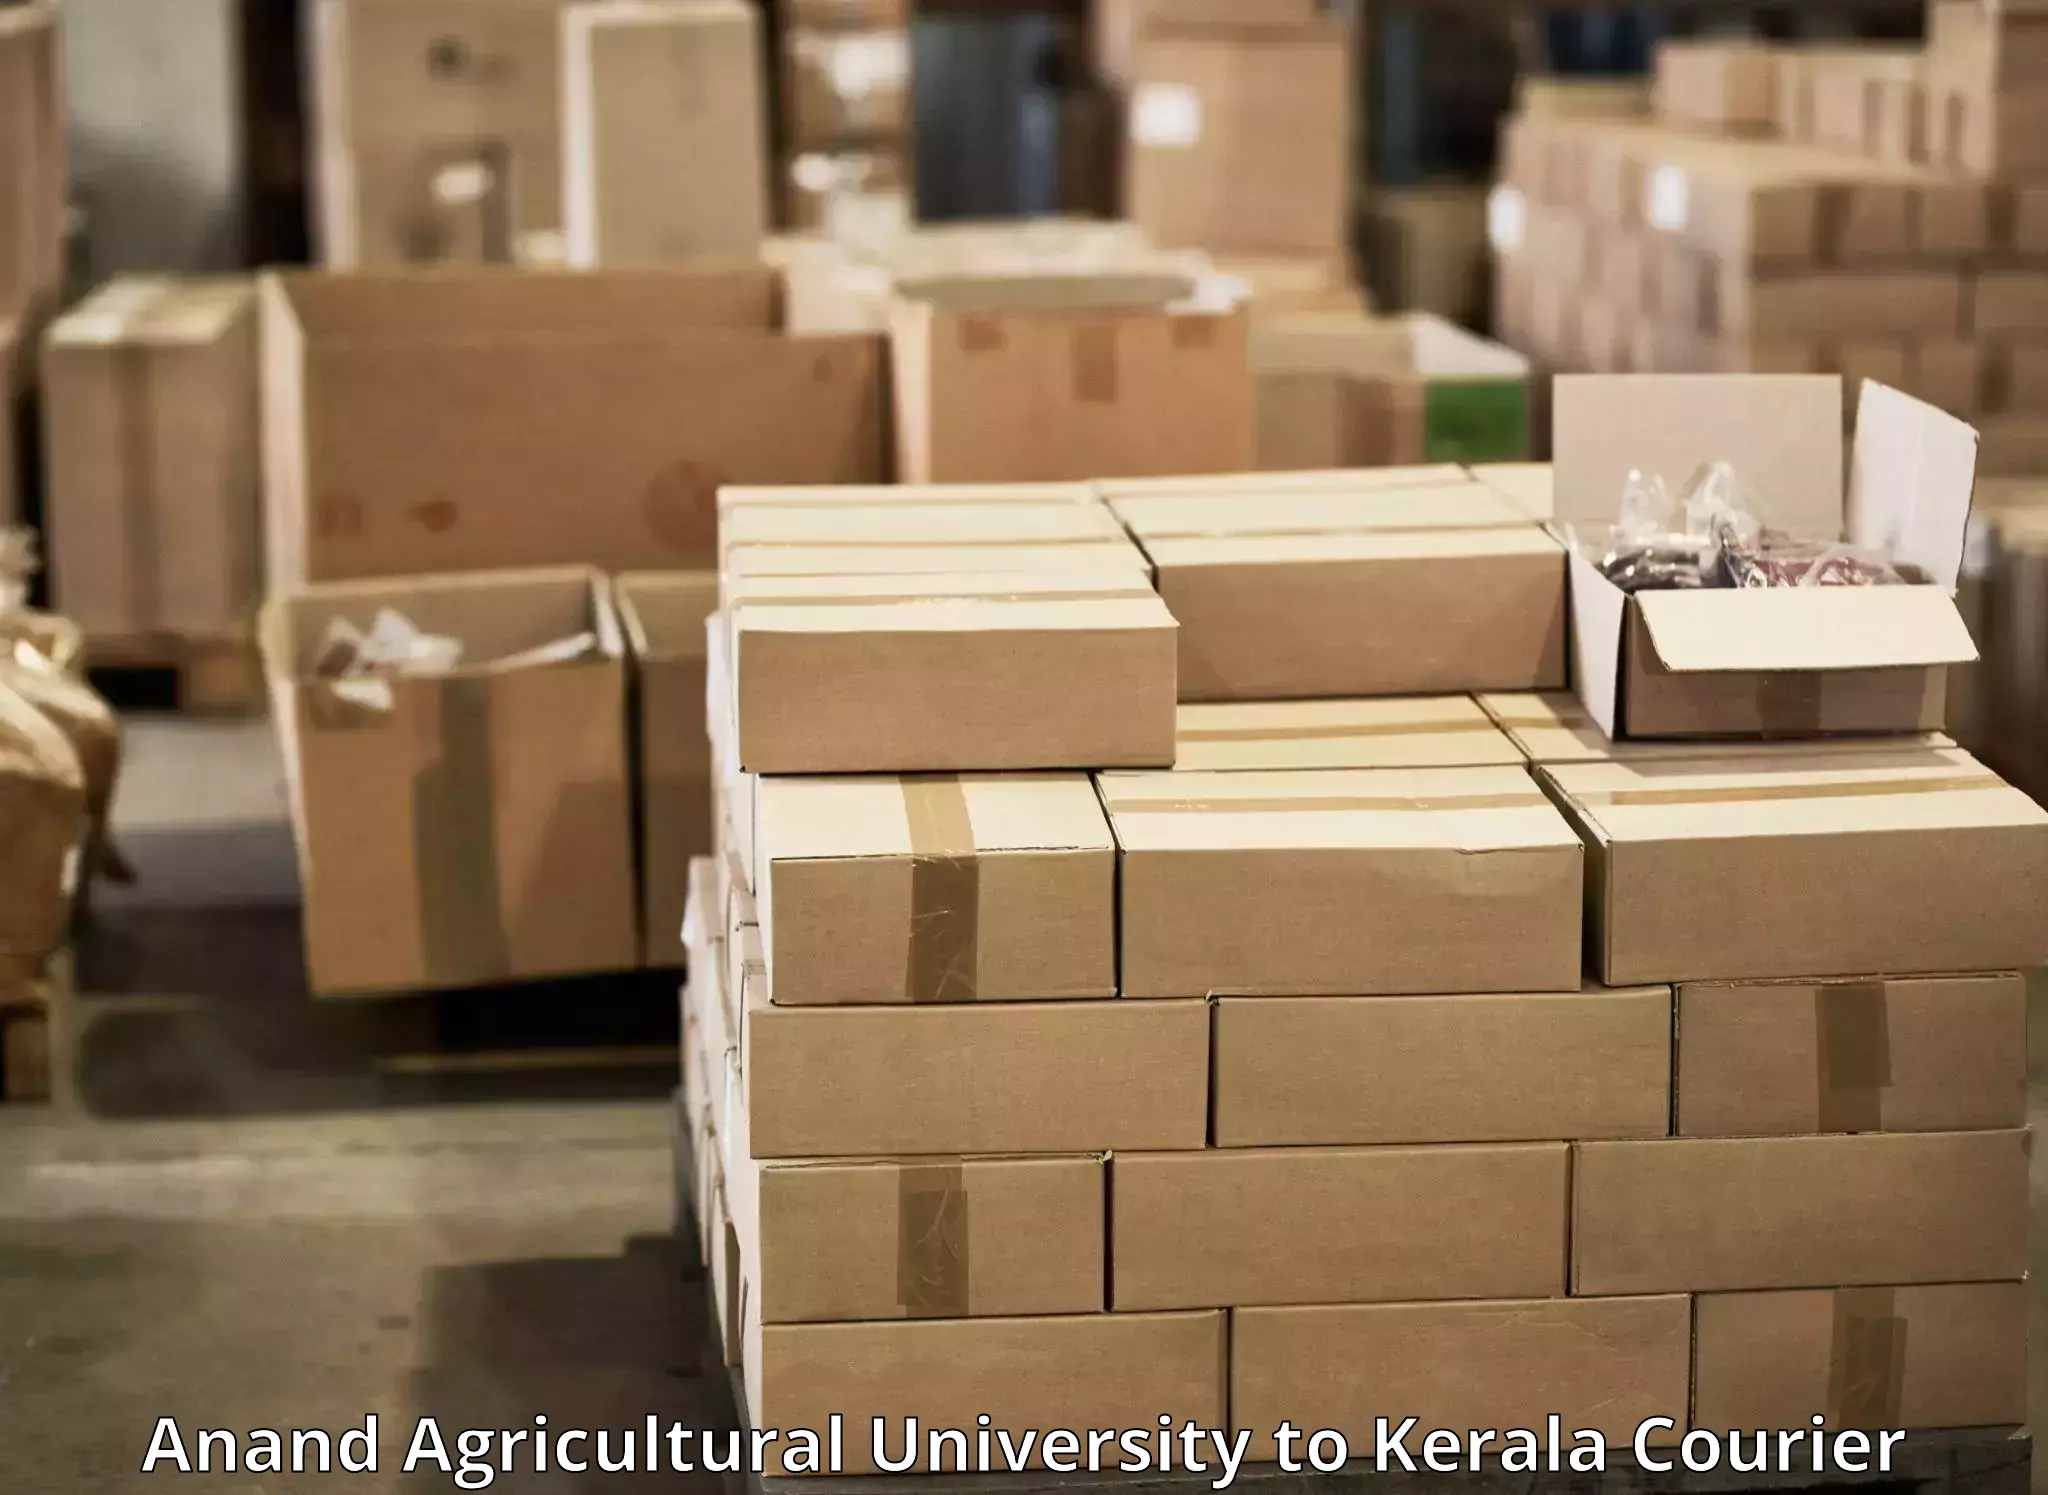 Express package transport Anand Agricultural University to Ponnani